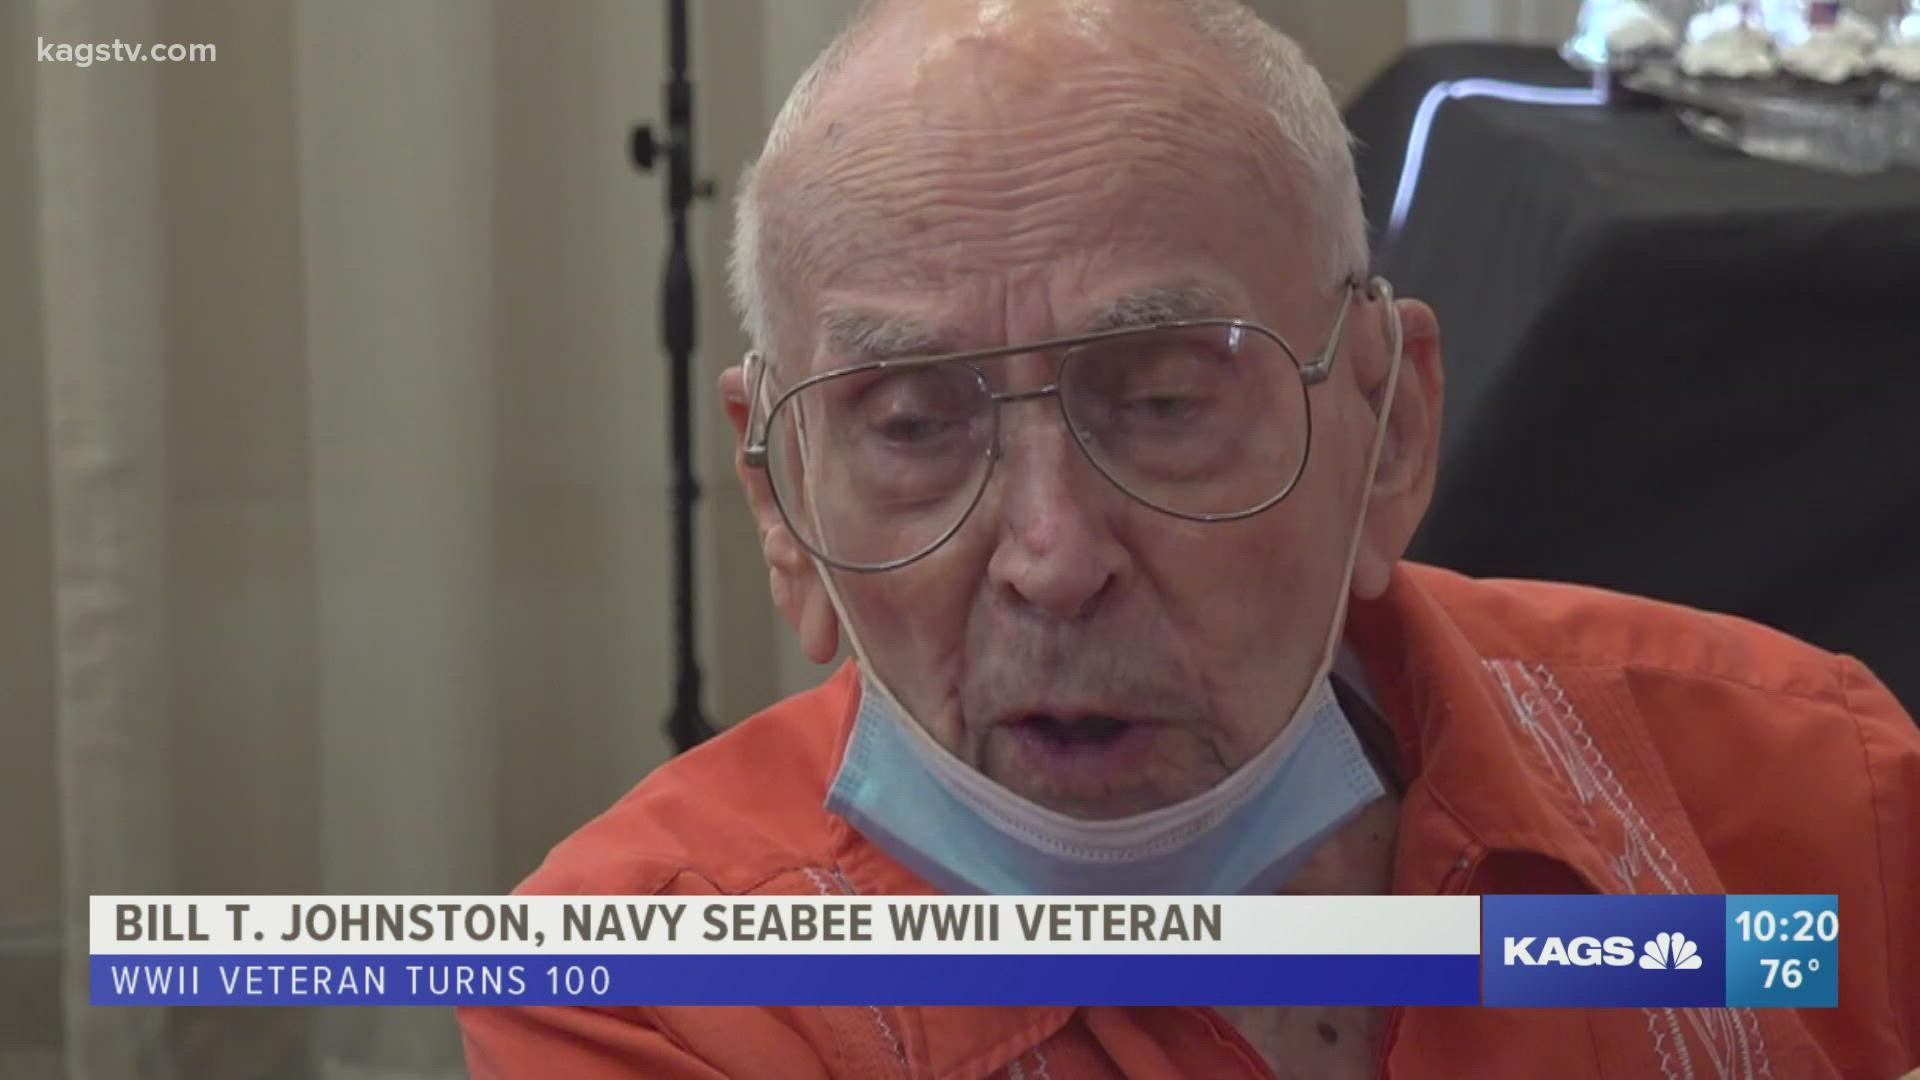 William T. Johnston received the WWII Victory medal when he was just 24 years old